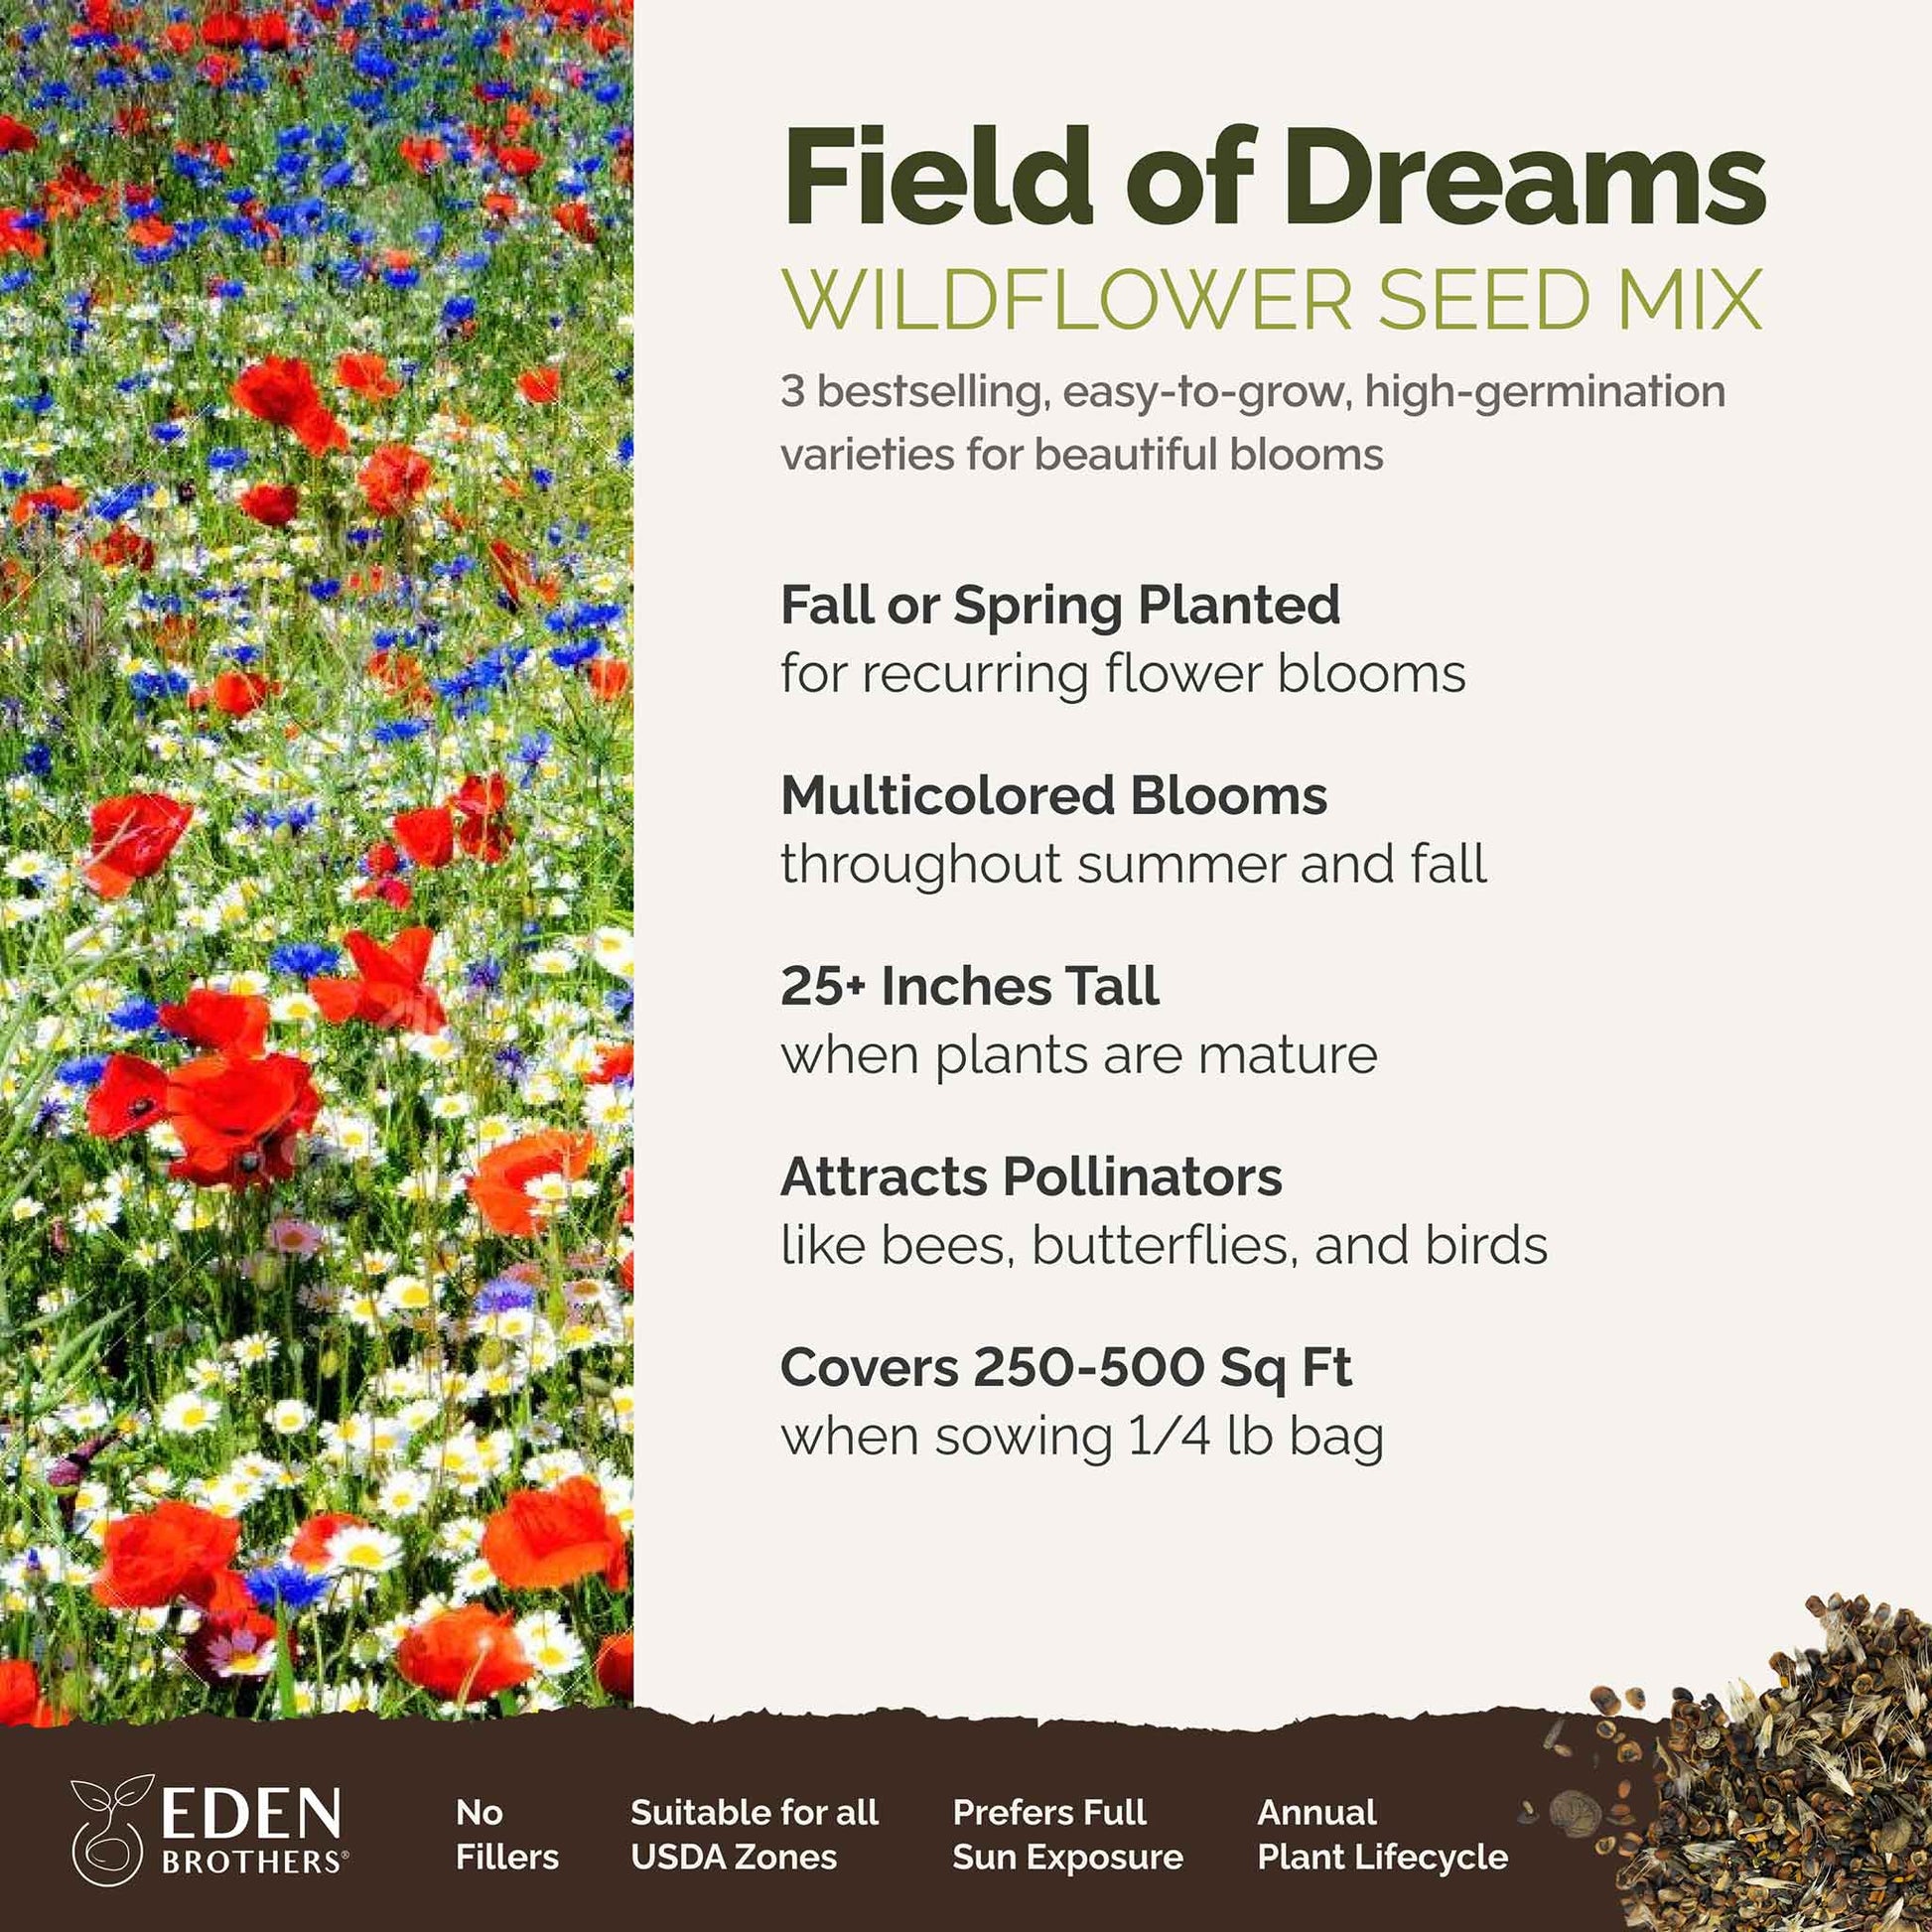 field of dreams overview